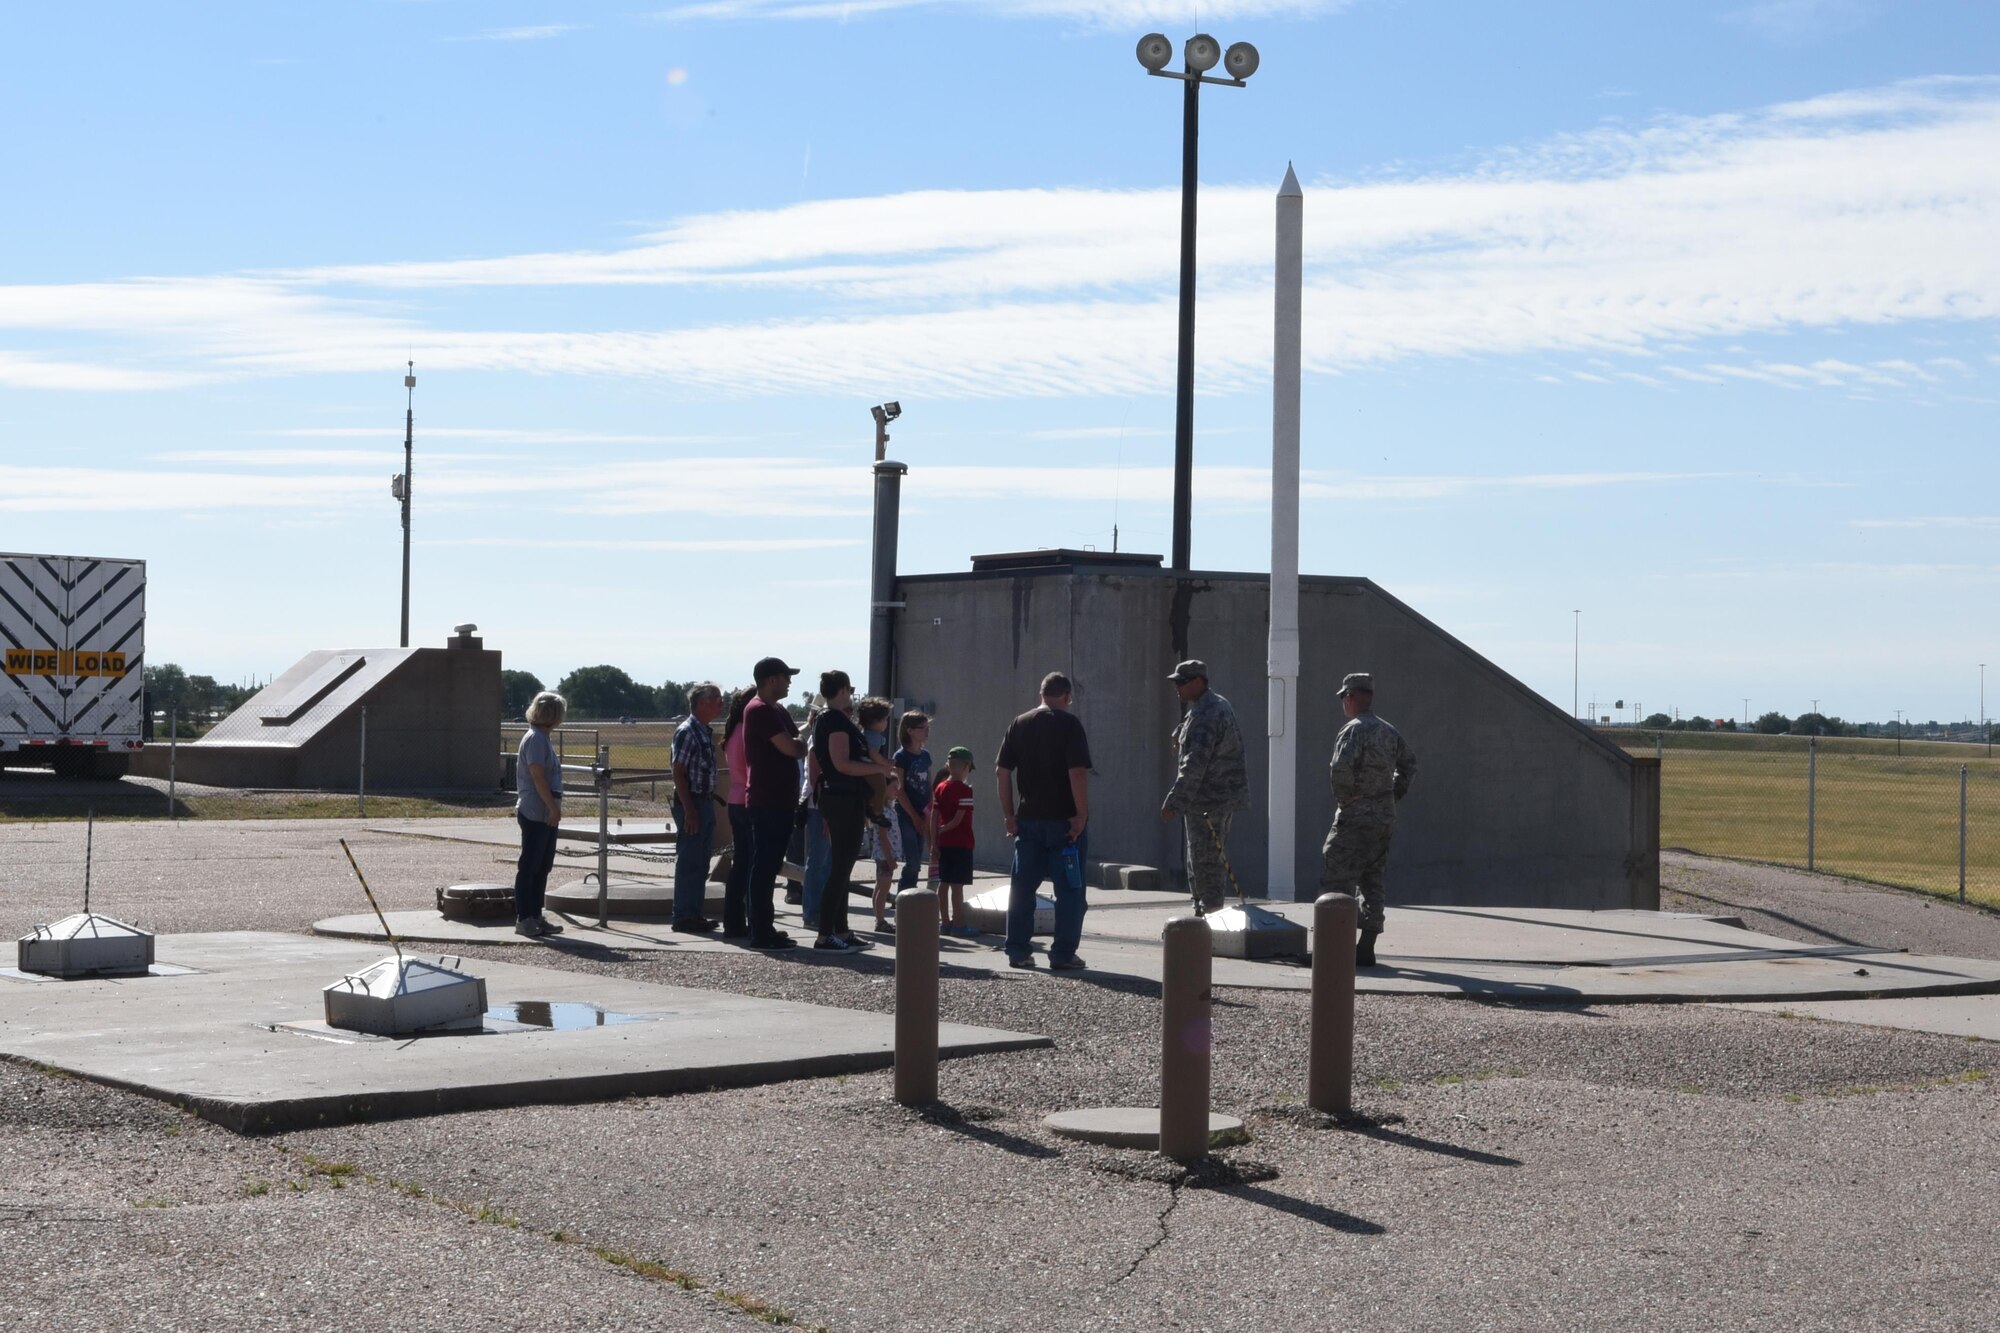 Tech. Sgt. Ruben Guerra, 790 MXS, section chief, talks to members of a tour of Uniform-01, a Minuteman III ICBM launch facility trainer during Fort D.A. Russell Days, at F.E. Warren Air Force Base, Wyo., July 22, 2017.  These types of tours allow the public to see what launch facilities look like throughout Nebraska, Wyoming and Colorado. (U.S. Air Force photo by Terry Higgins)